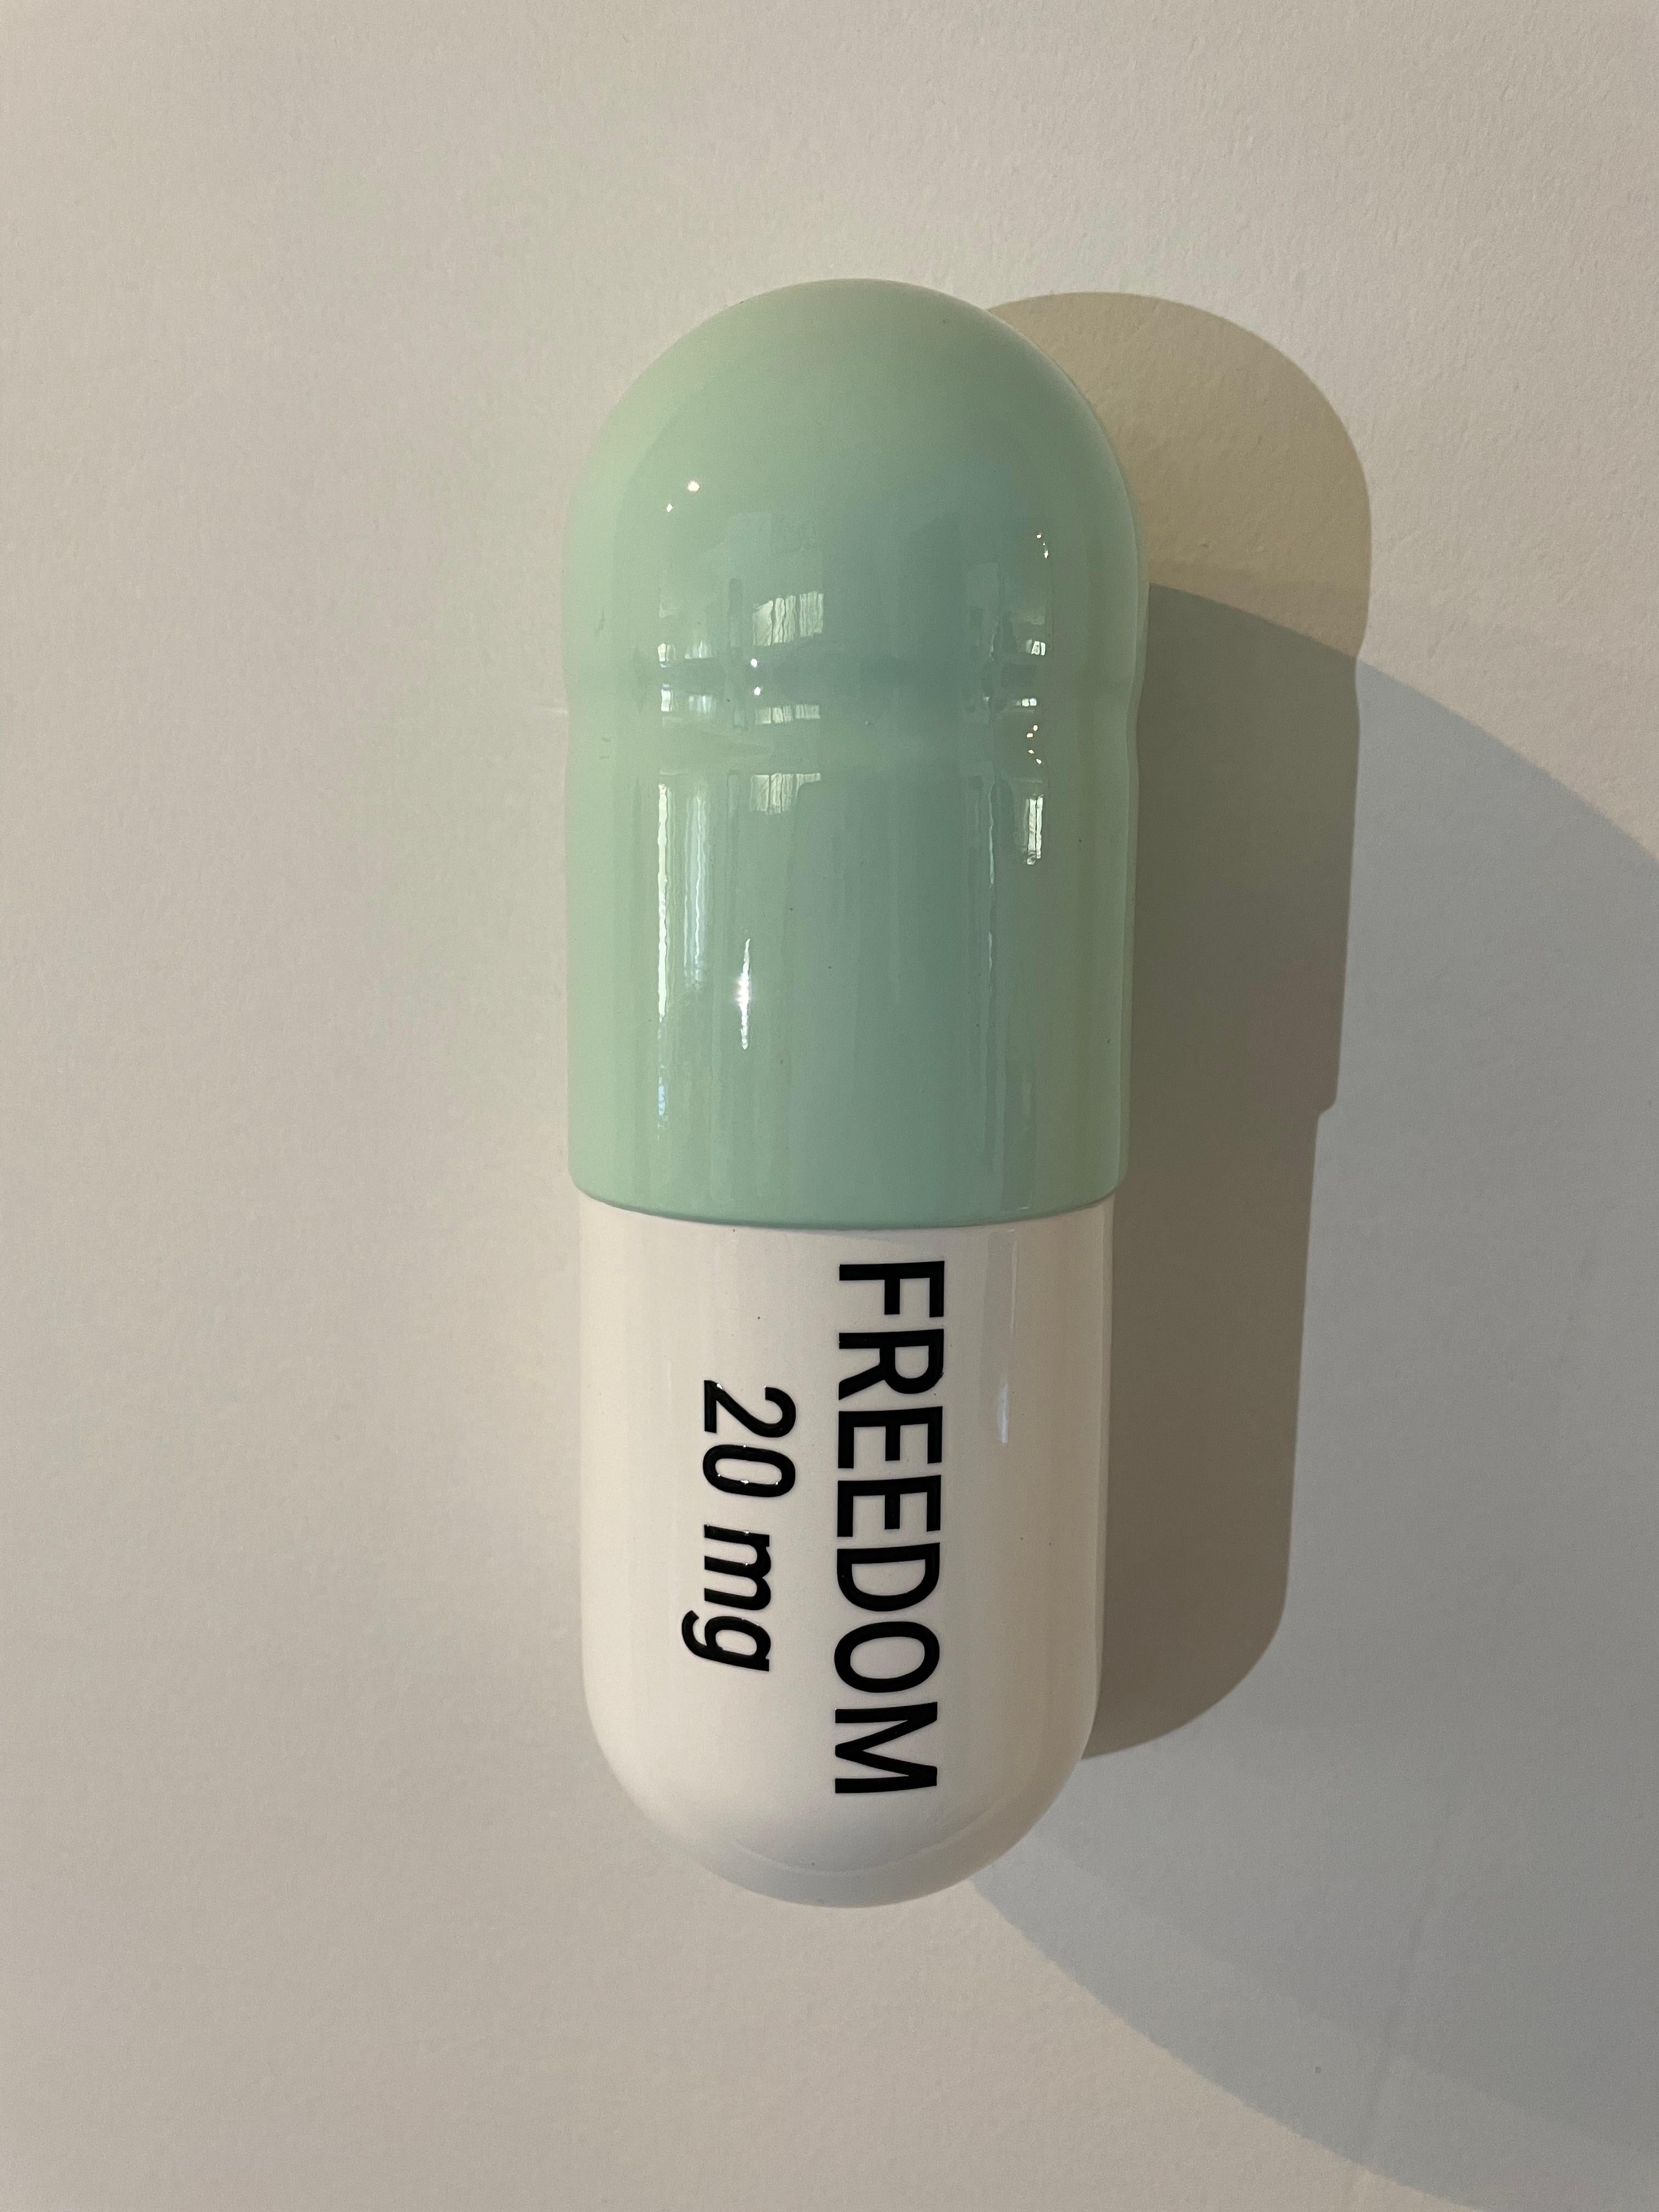 Tal Nehoray Figurative Sculpture - 20 MG Freedom pill (white and mint green) - figurative sculpture